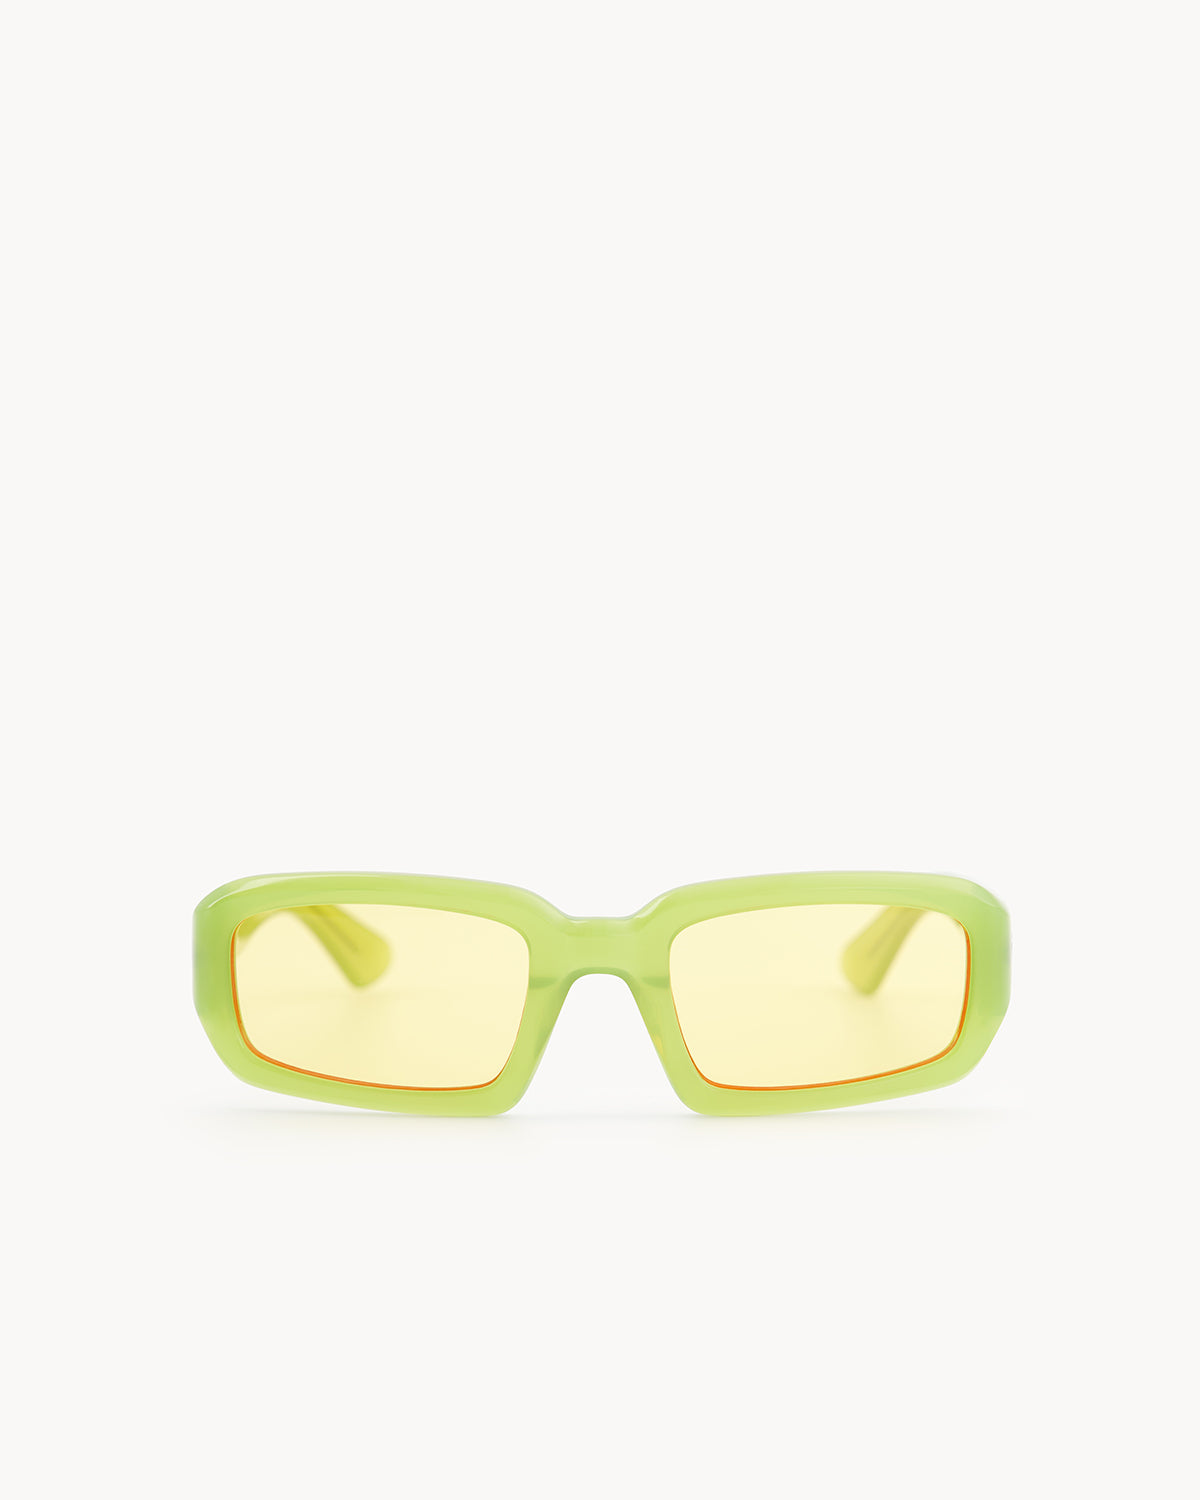 Port Tanger Mektoub Sunglasses in Lime Acetate and Warm Olive Lenses 1